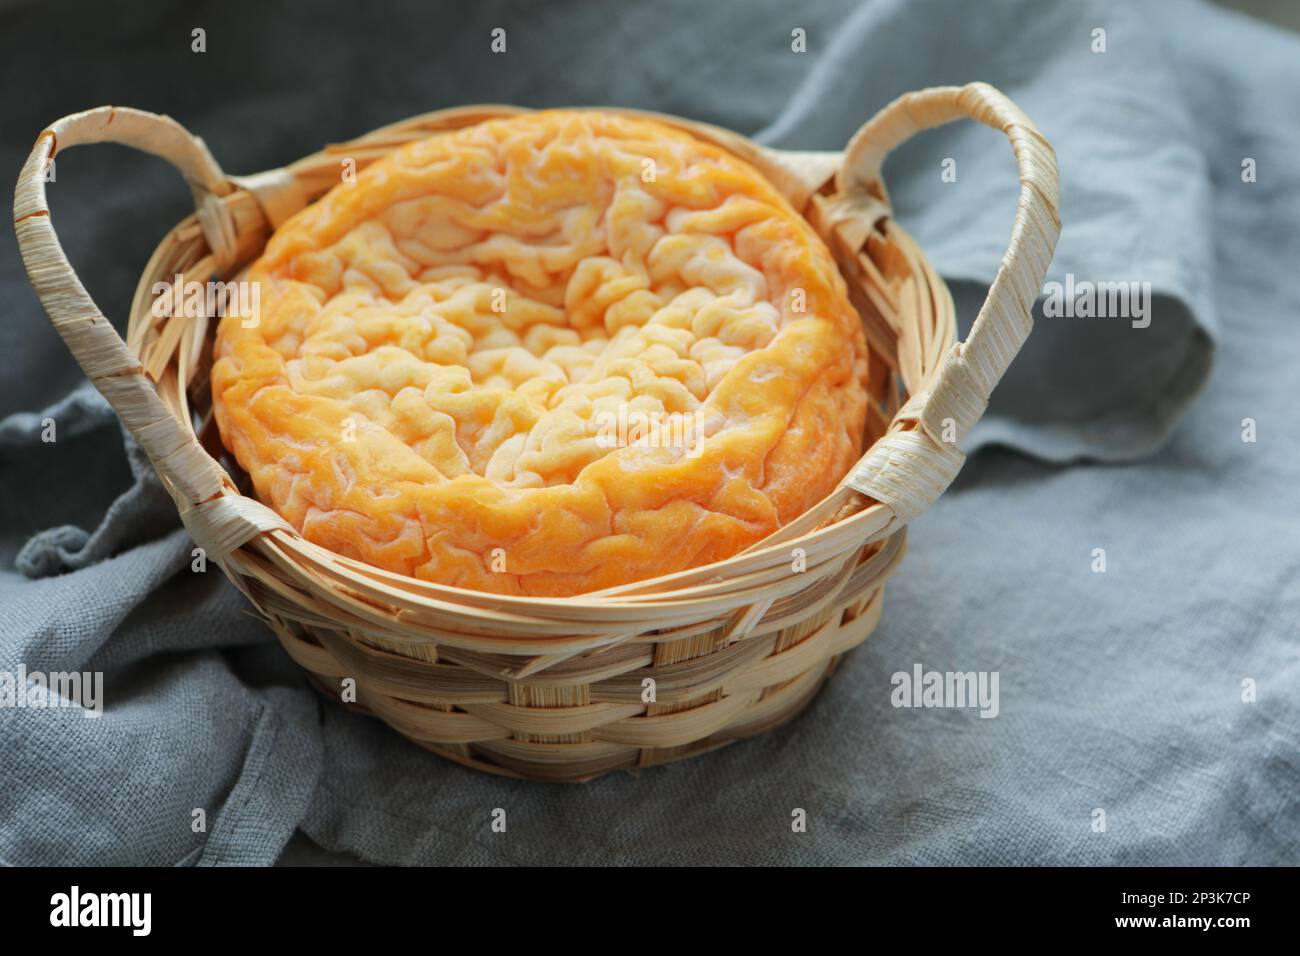 Langres cheese in a basket on a gray linen Stock Photo